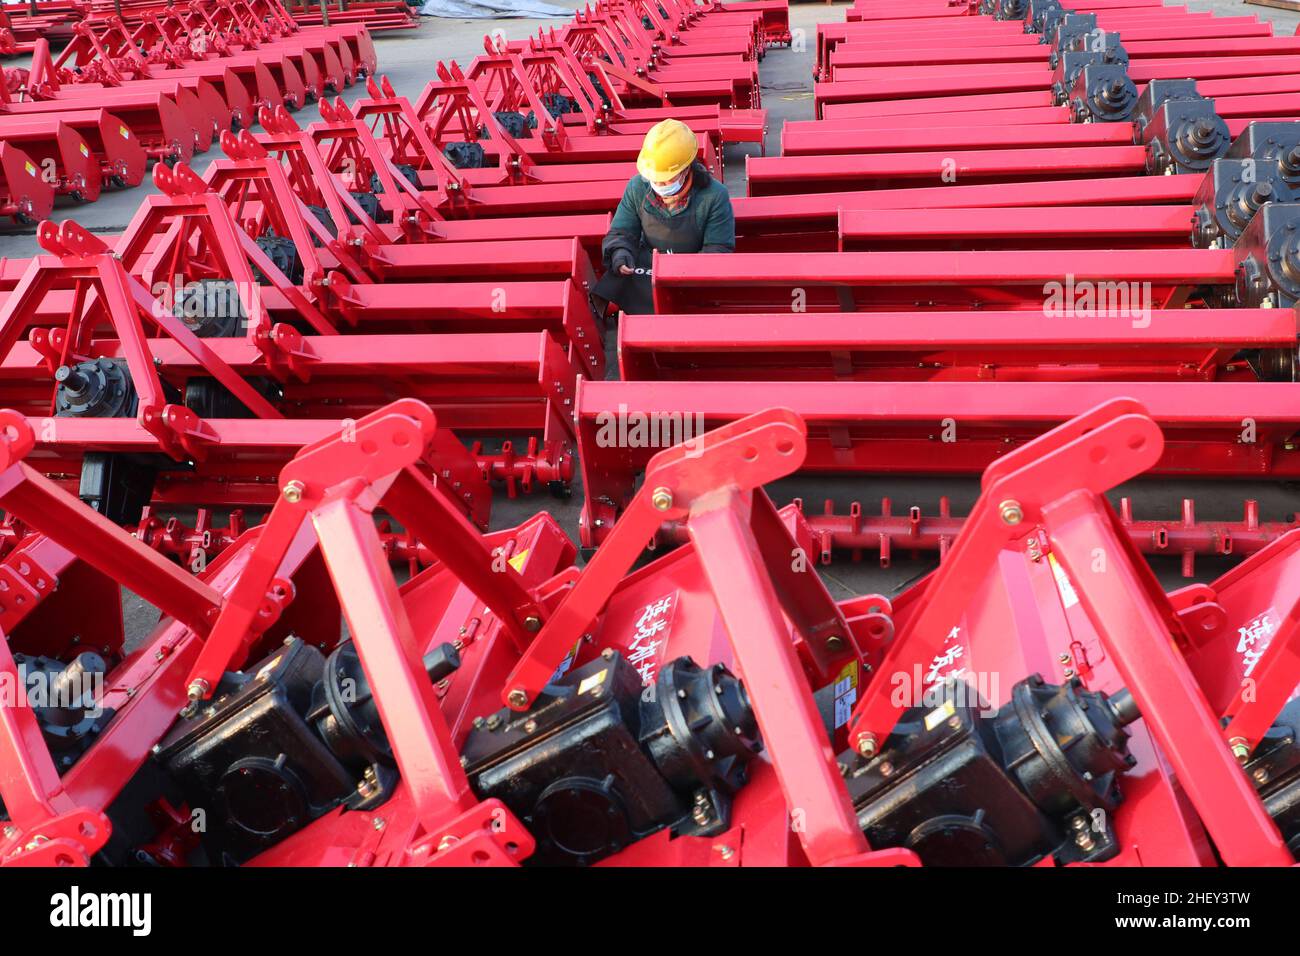 Lianyungang, Lianyungang, China. 13th Jan, 2022. On January 13, 2022, workers in a rotary cultivator production enterprise in Guanyun Economic Development Zone, Lianyungang City, Jiangsu Province were testing the rotary cultivators that were about to leave the factory.At the beginning of the new year, the sales of agricultural rotary tillers in Guanyun County, Lianyungang City, Jiangsu Province soared, and all rotary tiller manufacturers worked overtime to produce orders. In recent years, Guanyun county has developed more than 40 varieties of nine series of agricultural rotary cultivator Stock Photo